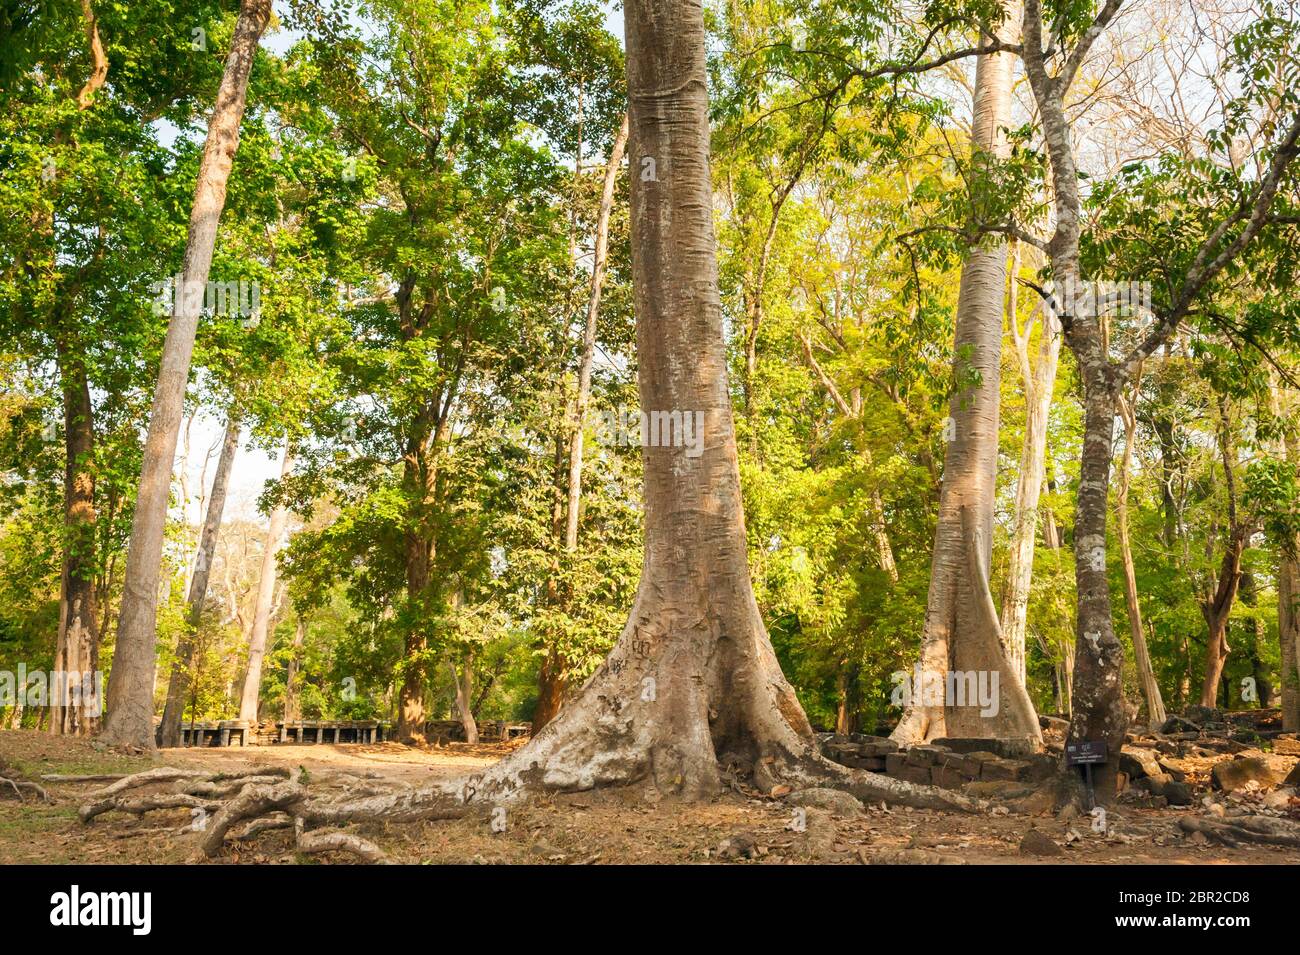 Silk cotton trees in the forest at Angkor Thom. Angkor, UNESCO World Heritage Site, Siem Reap Province, Cambodia, Southeast Asia Stock Photo